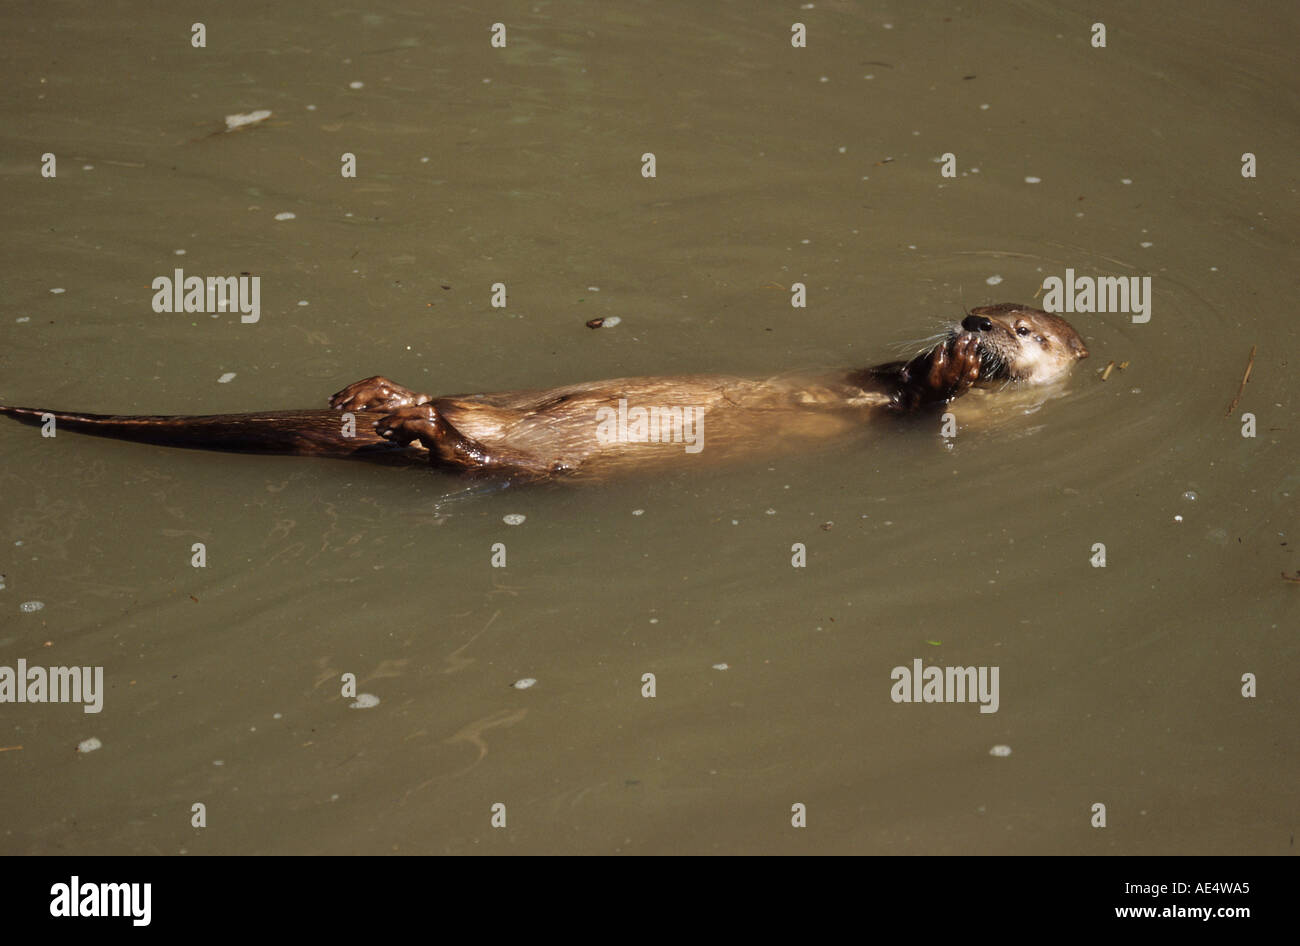 North American River Otter (Lontra canadensis) drifting on its back in a river Stock Photo